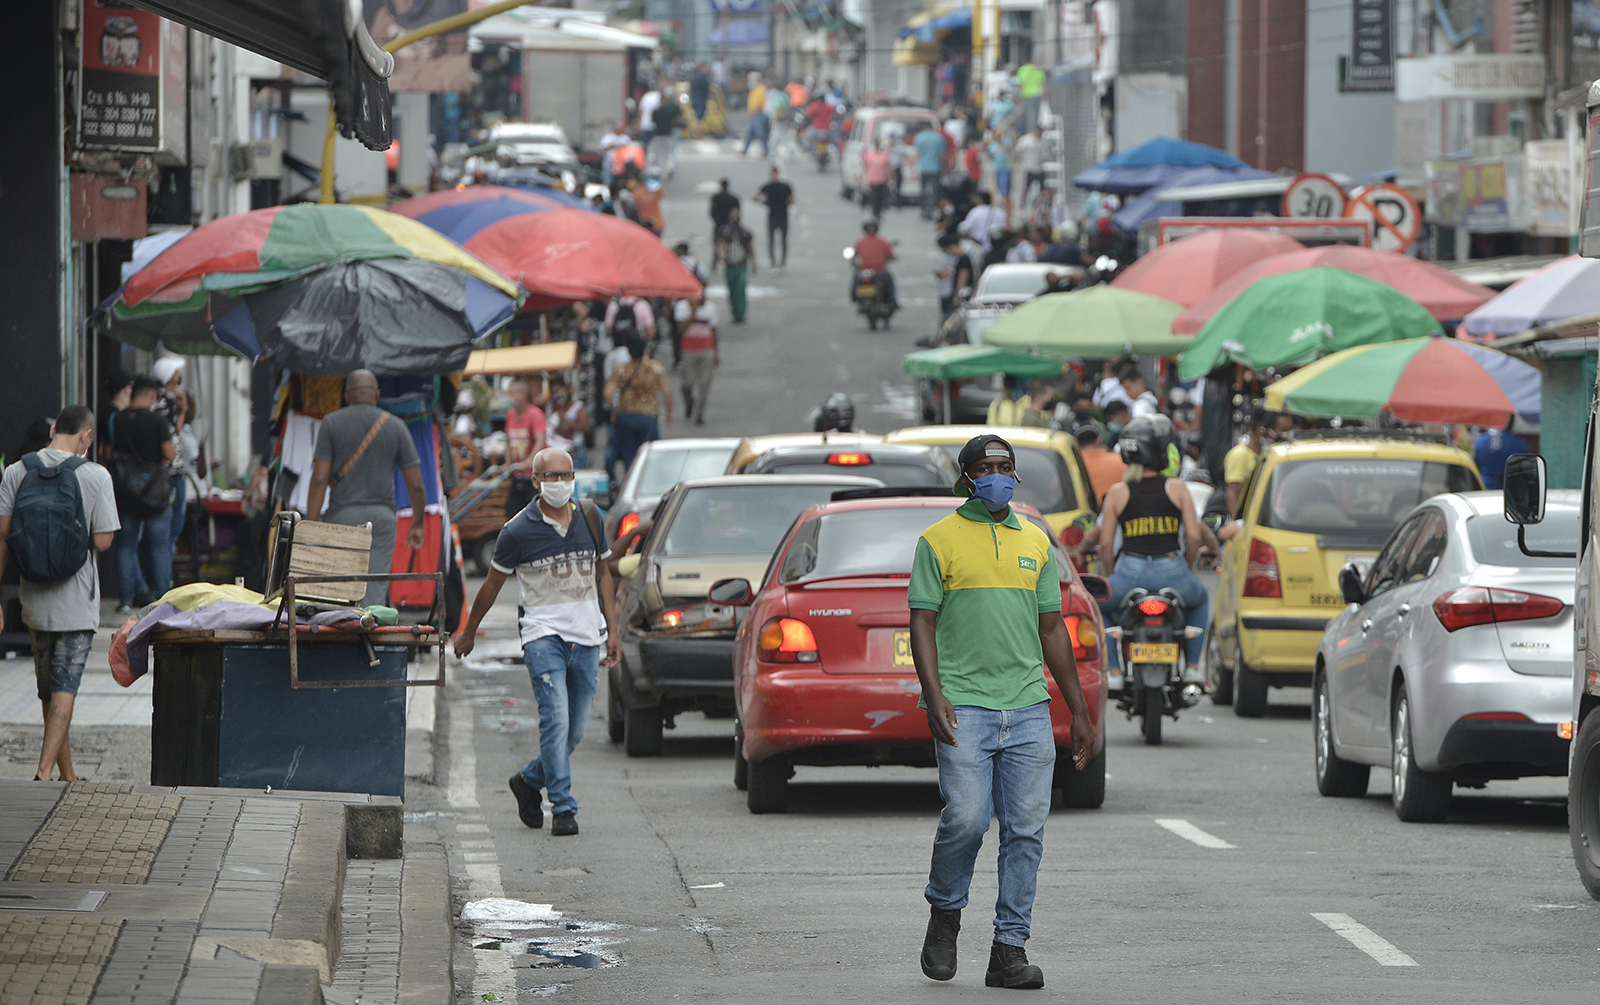 A man wearing a face mask walks down a busy street in Cali, Colombia, on June 1.